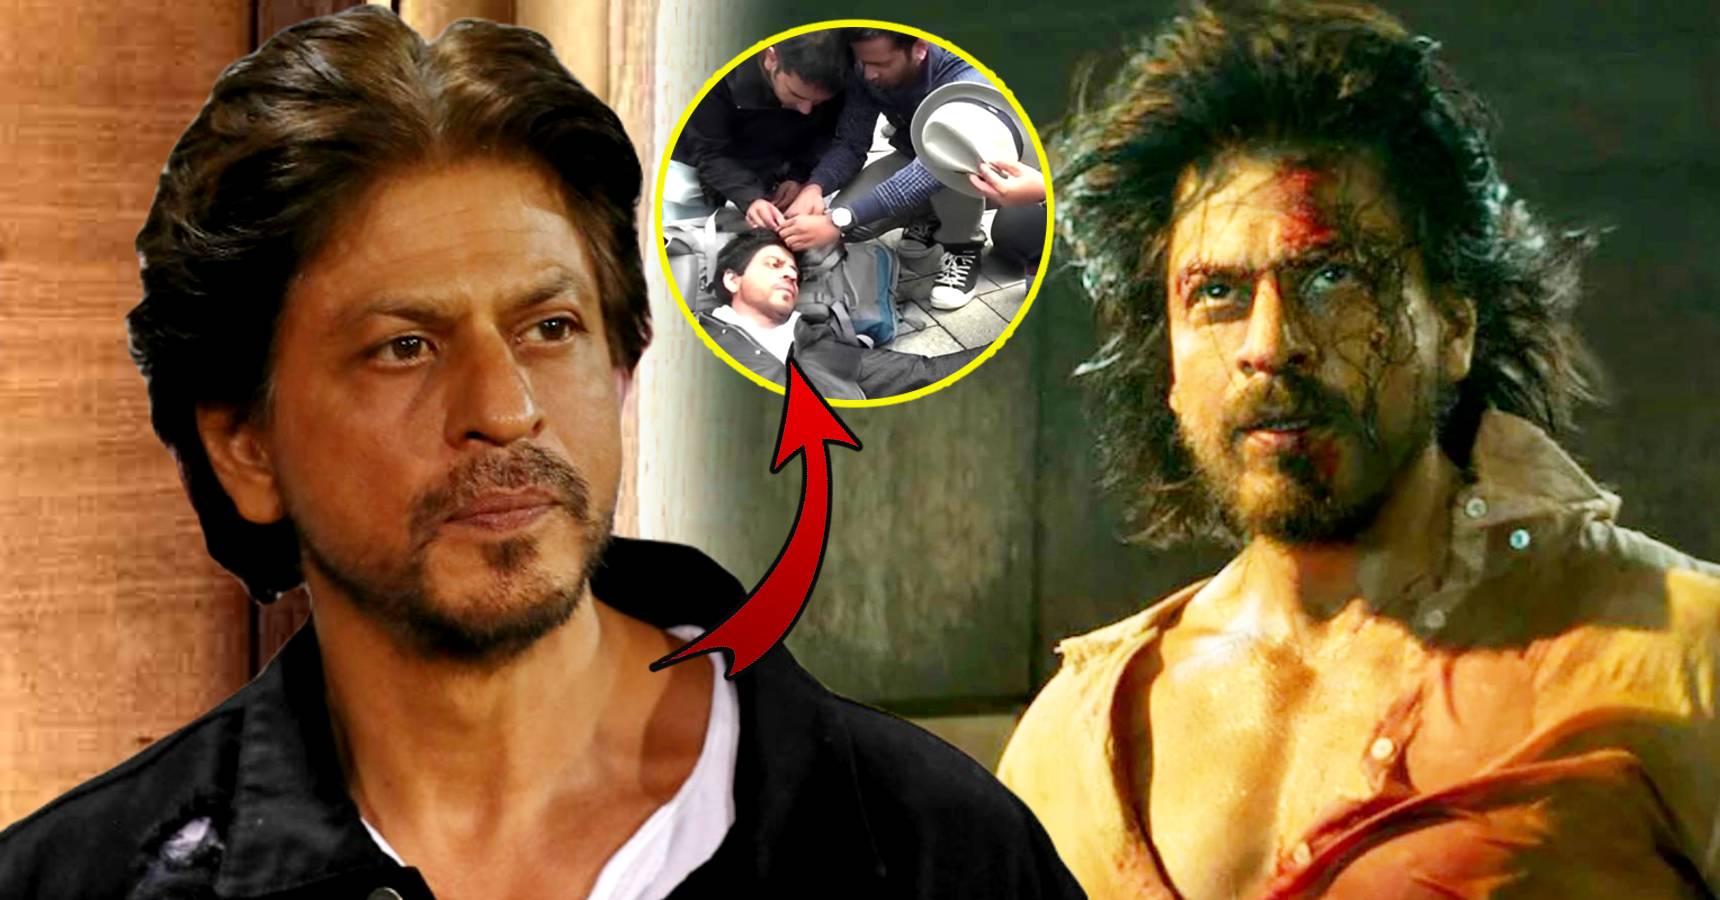 Bollywood actor Shah Rukh Khan got injured during shooting in Los Angeles